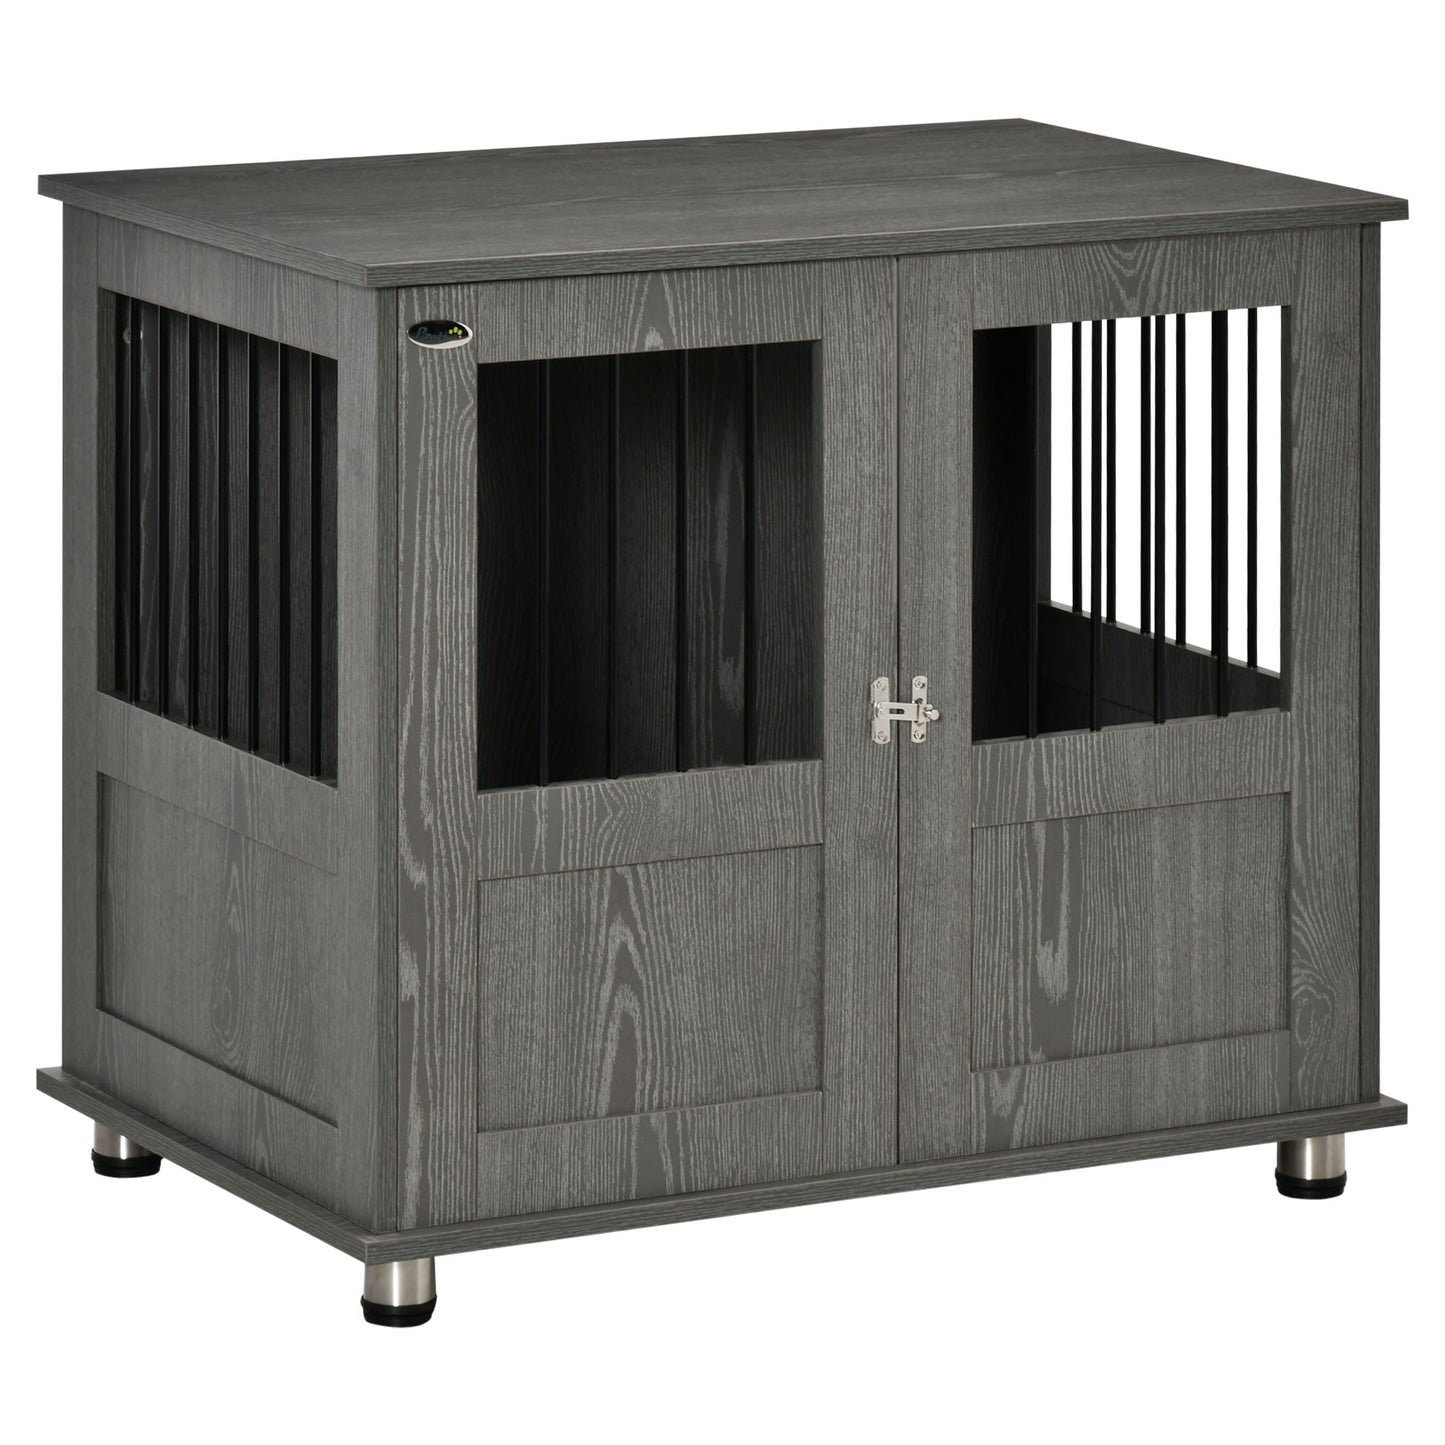 Pet Supplies-Stylish Dog Kennel, Dog Crate Furniture Table with Cushion & Lockable Magnetic Doors, Small Size Pet Crate Indoor Animal Cage, Gray - Outdoor Style Company